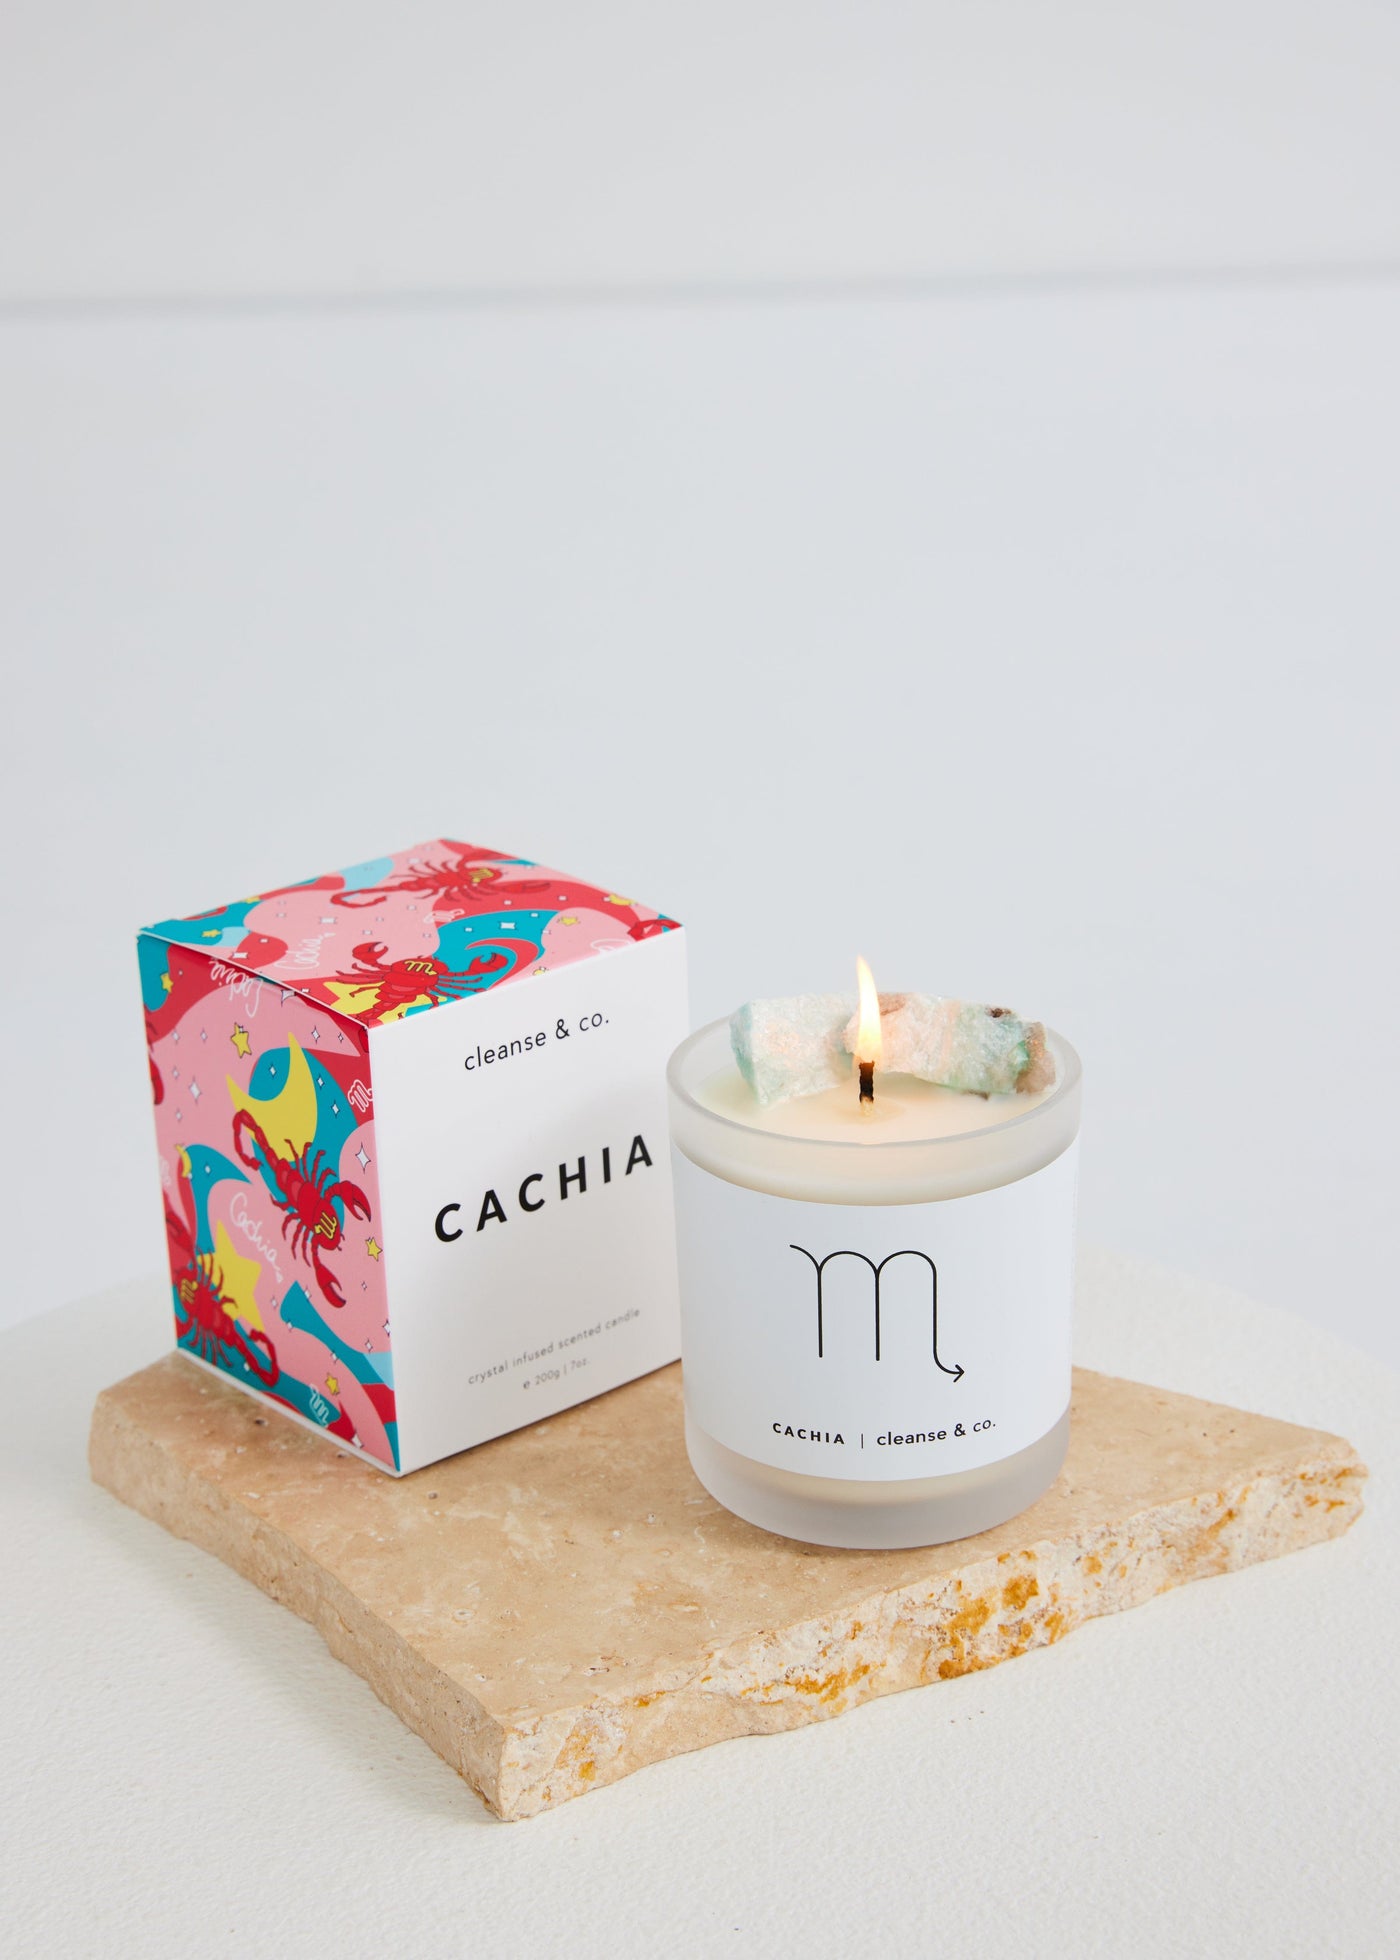 Cachia Scorpio Crystal Candle candle